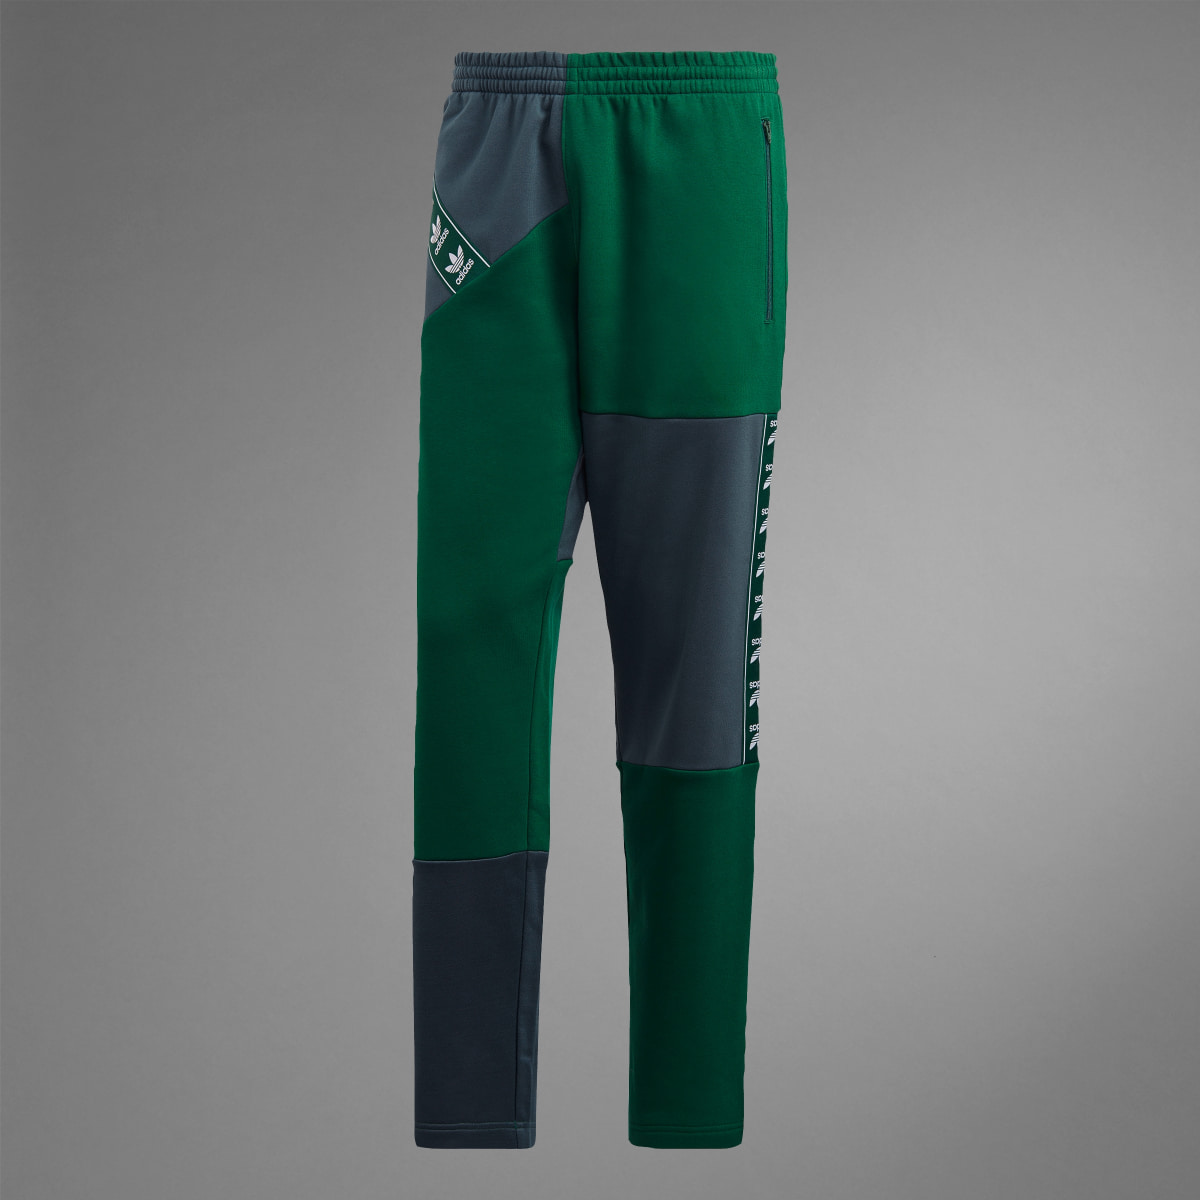 Adidas ADC Patchwork FB Track Pants. 10